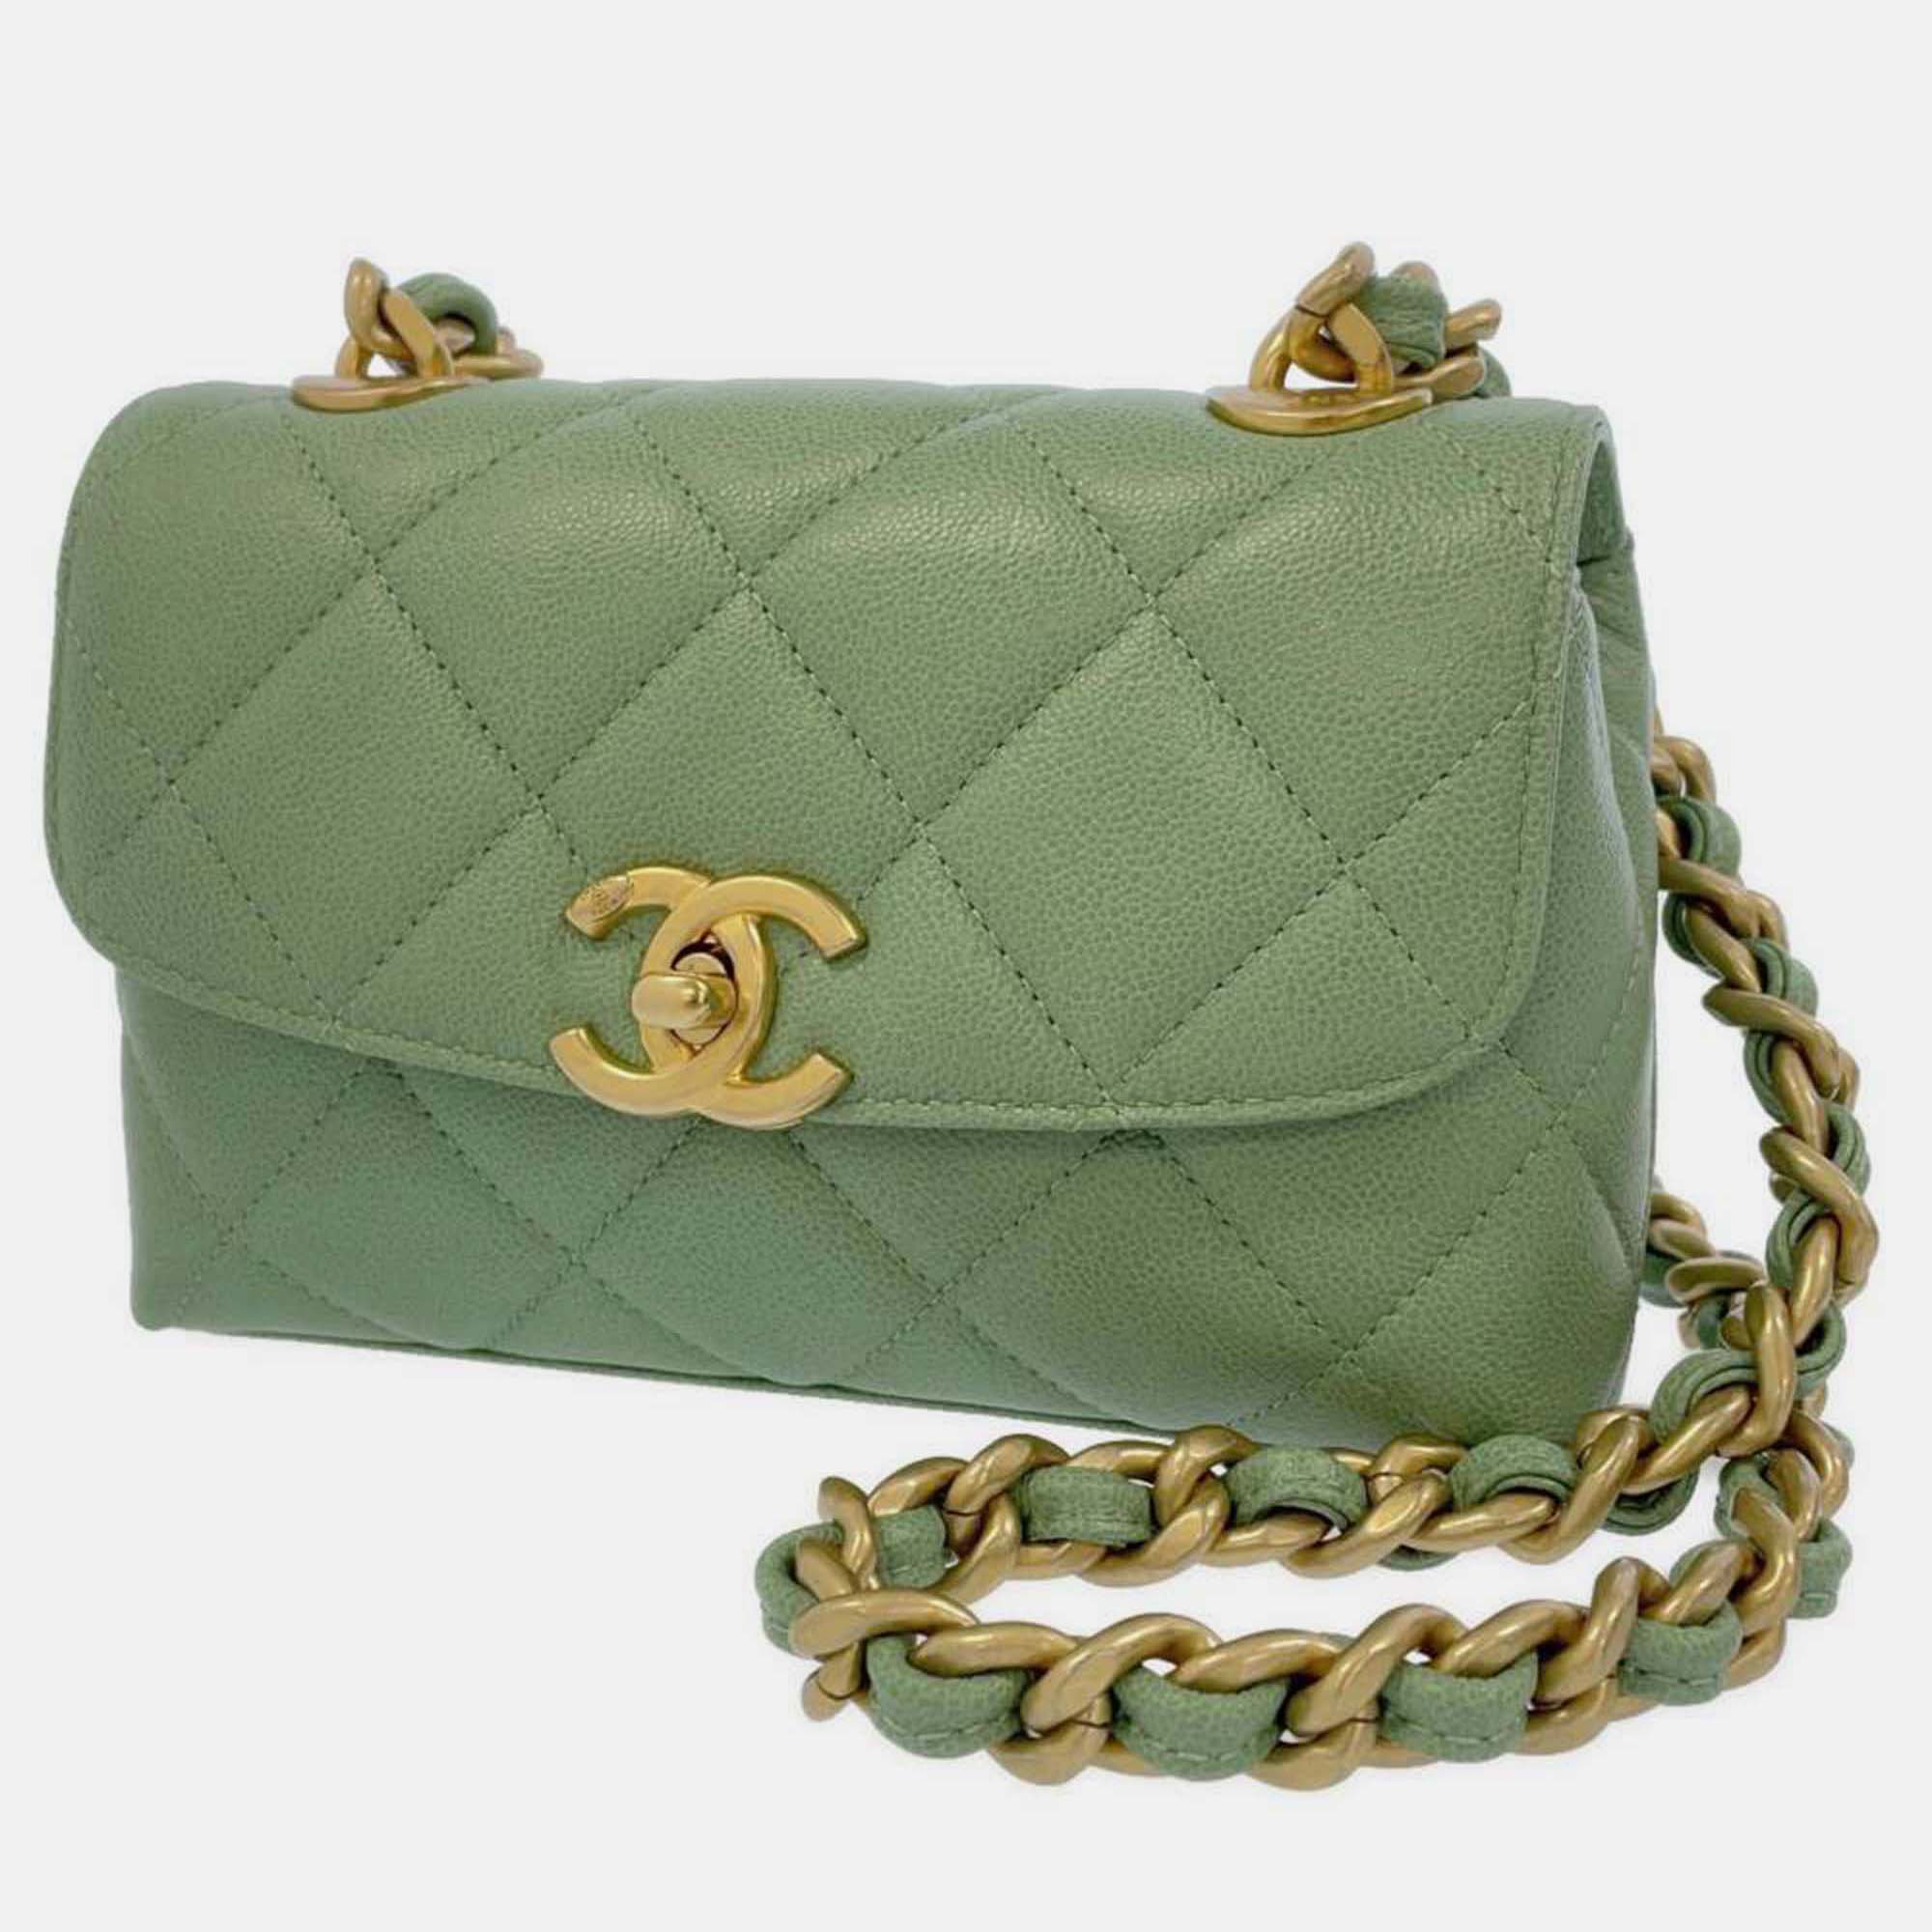 Pre-owned Chanel Green Leather Cc Flap Bag